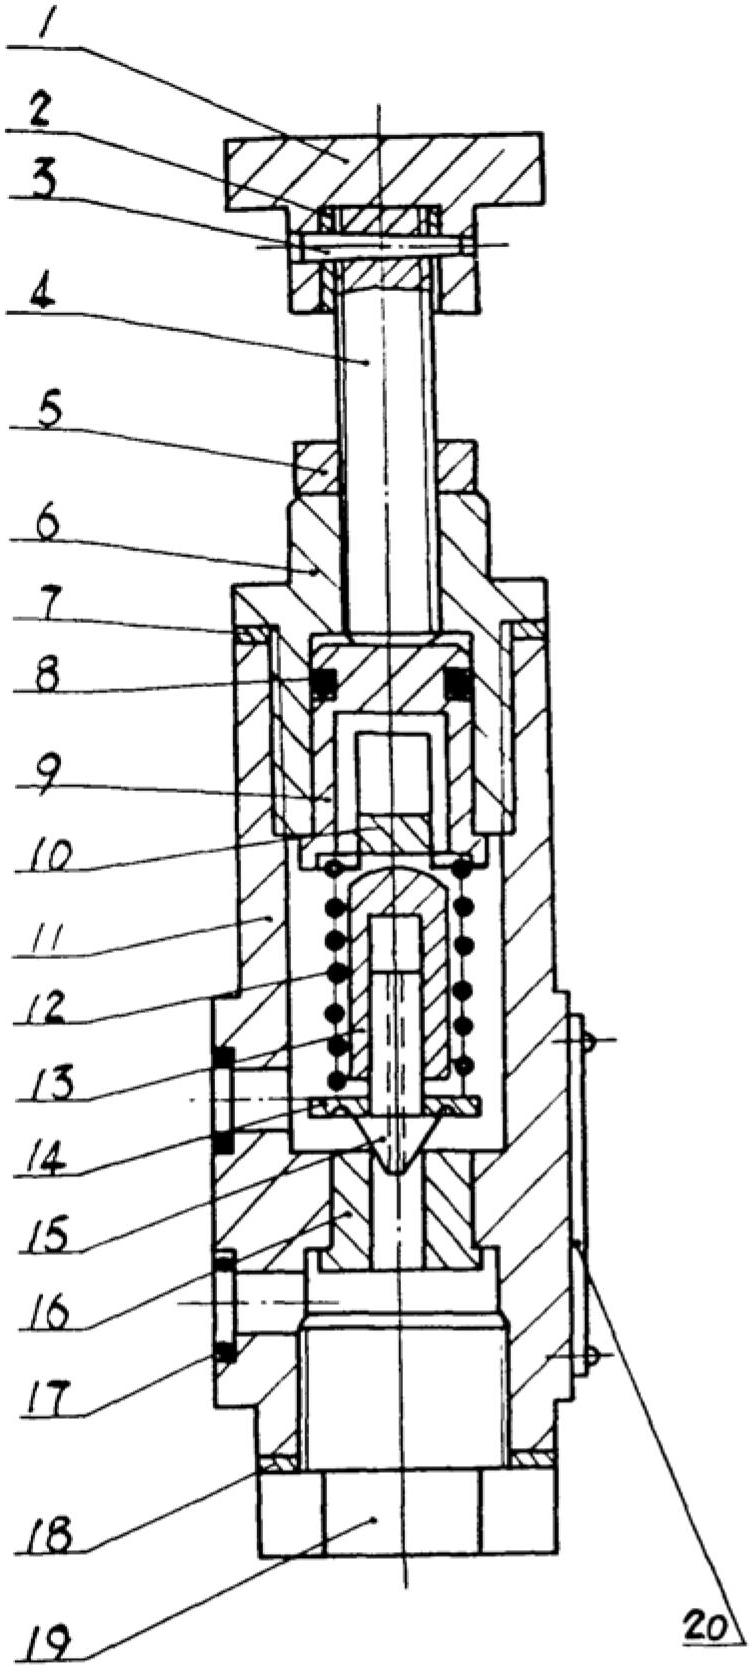 Direct-acting overflow valve, direct-acting overflow valve group and hydraulic overflow loop